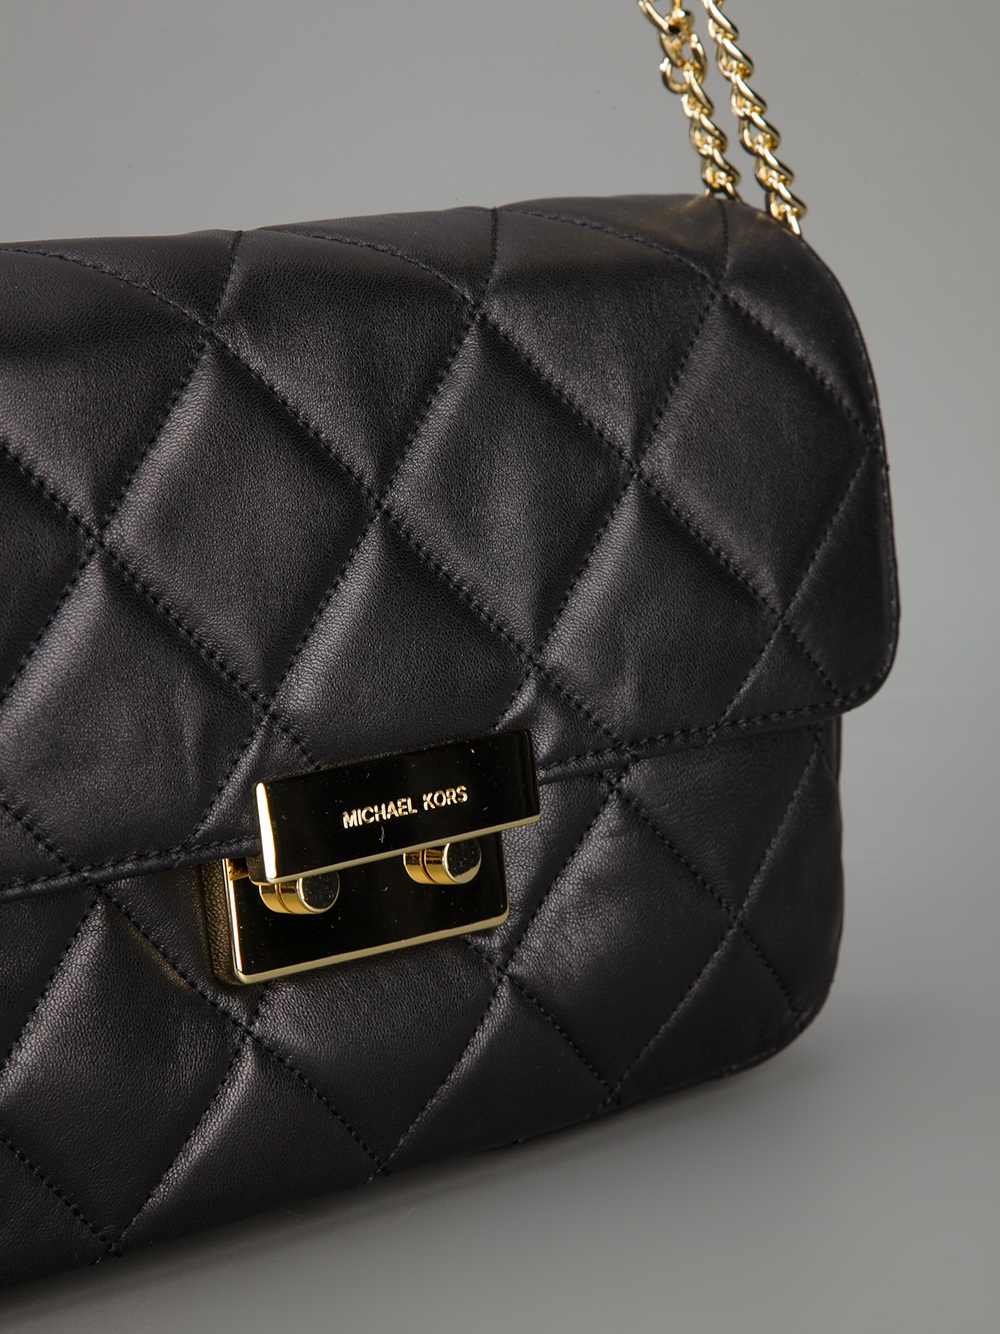 Michael michael kors Quilted Chain Shoulder Bag in Black | Lyst